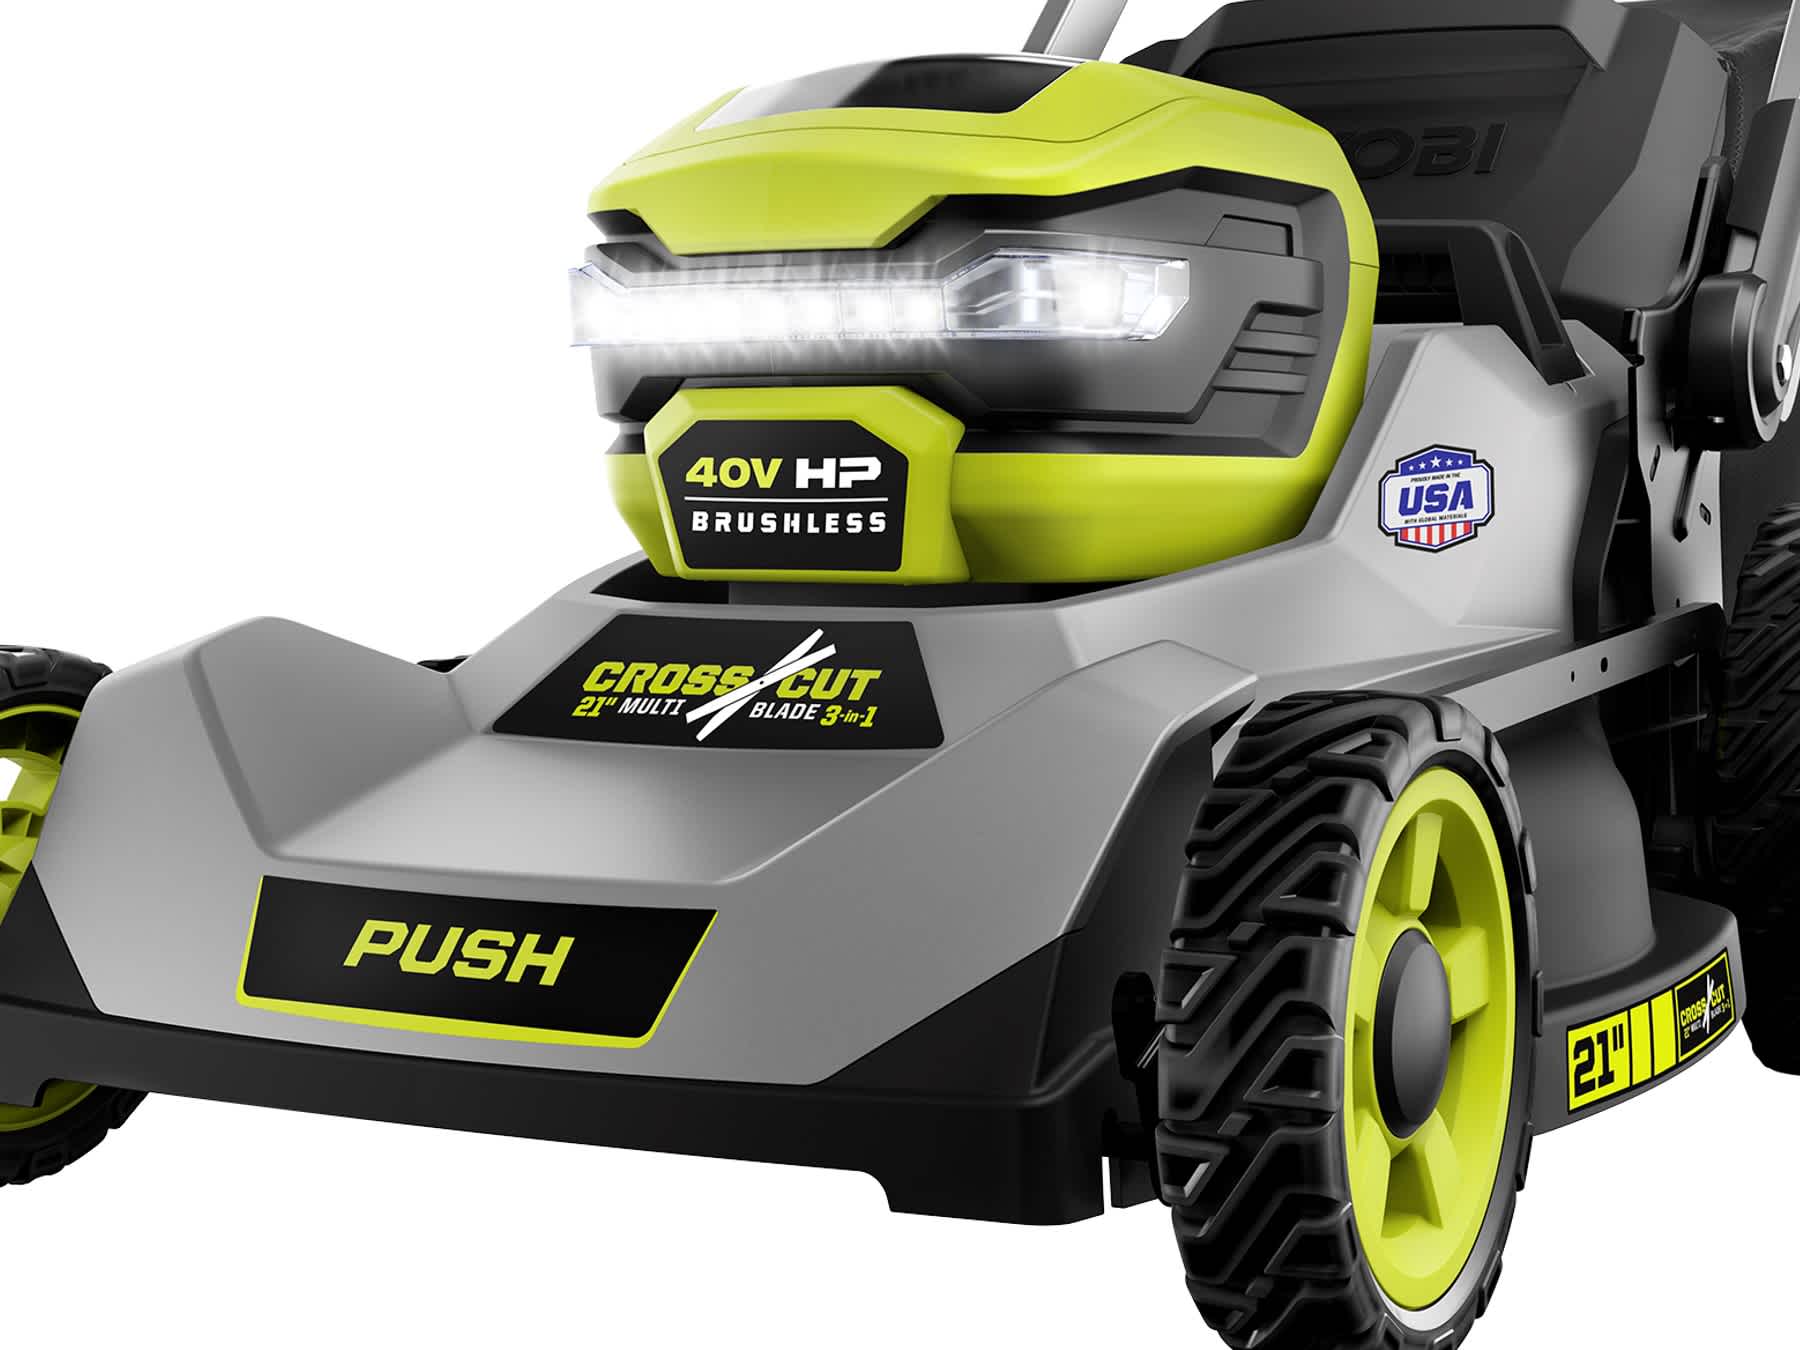 Product Features Image for 40V HP BRUSHLESS 21" CROSSCUT PUSH LAWN MOWER KIT.